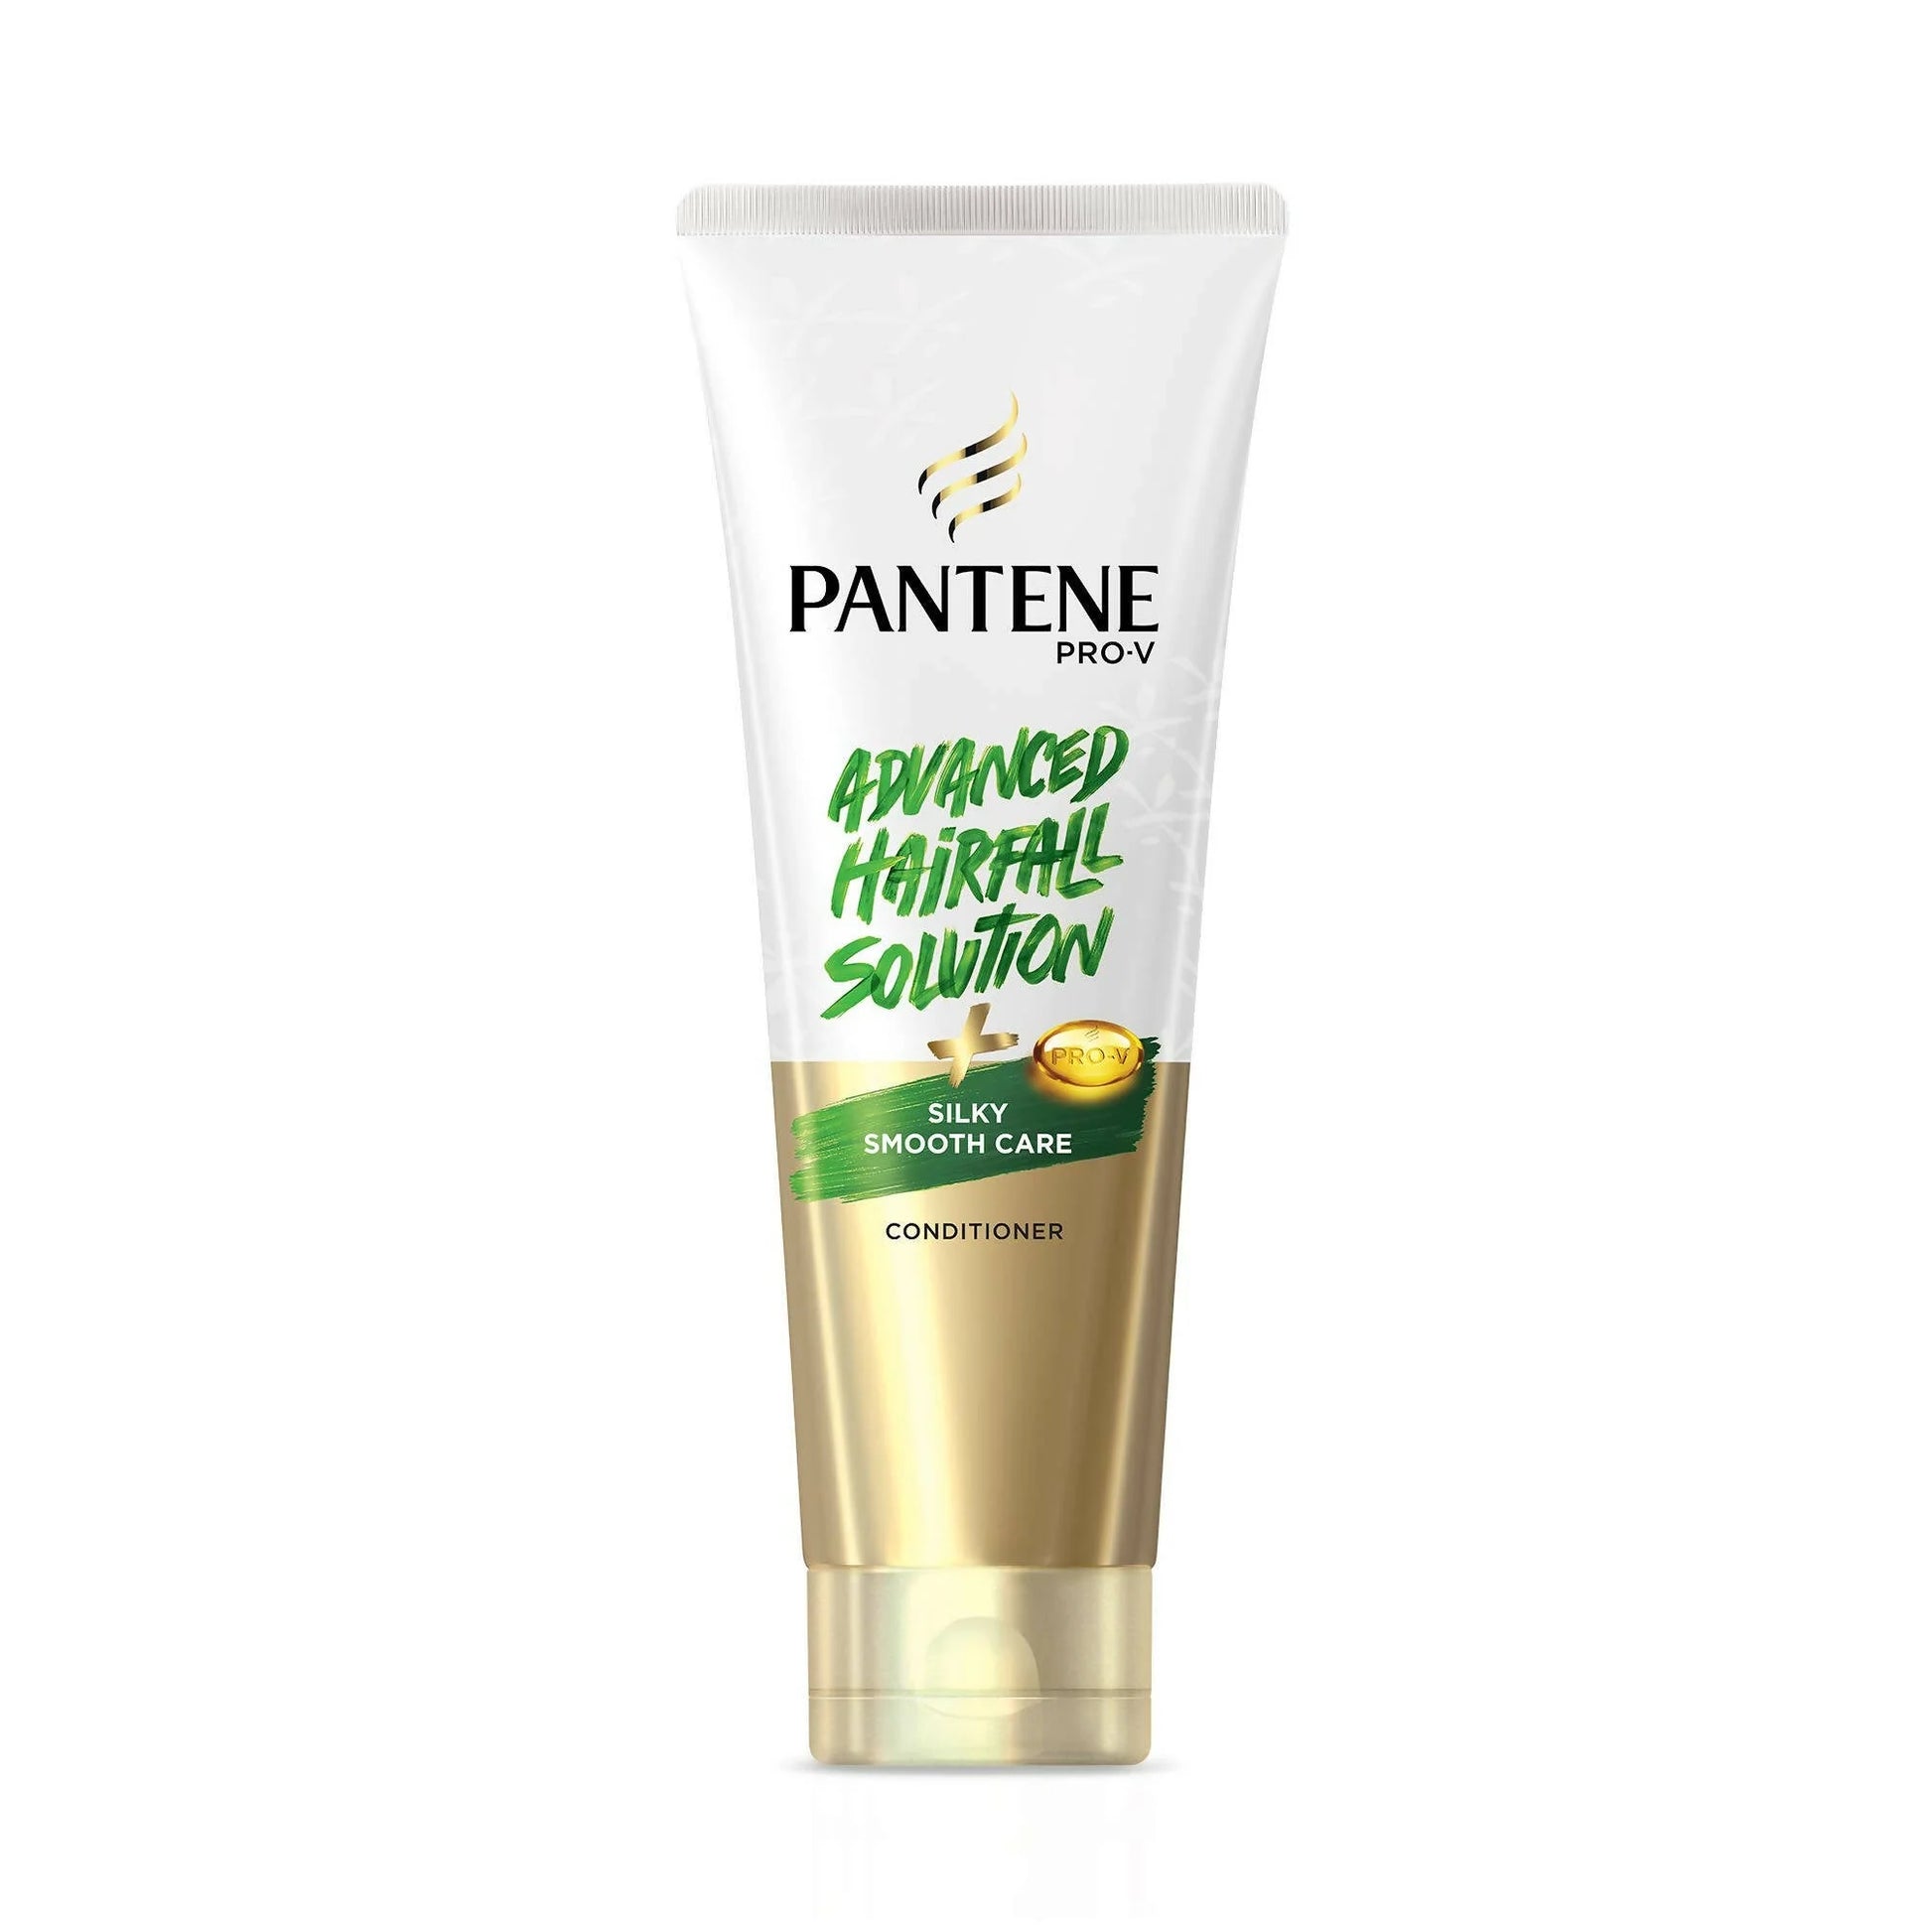 Pantene Advanced Hairfall Solution Conditioner for Silky Smooth Care